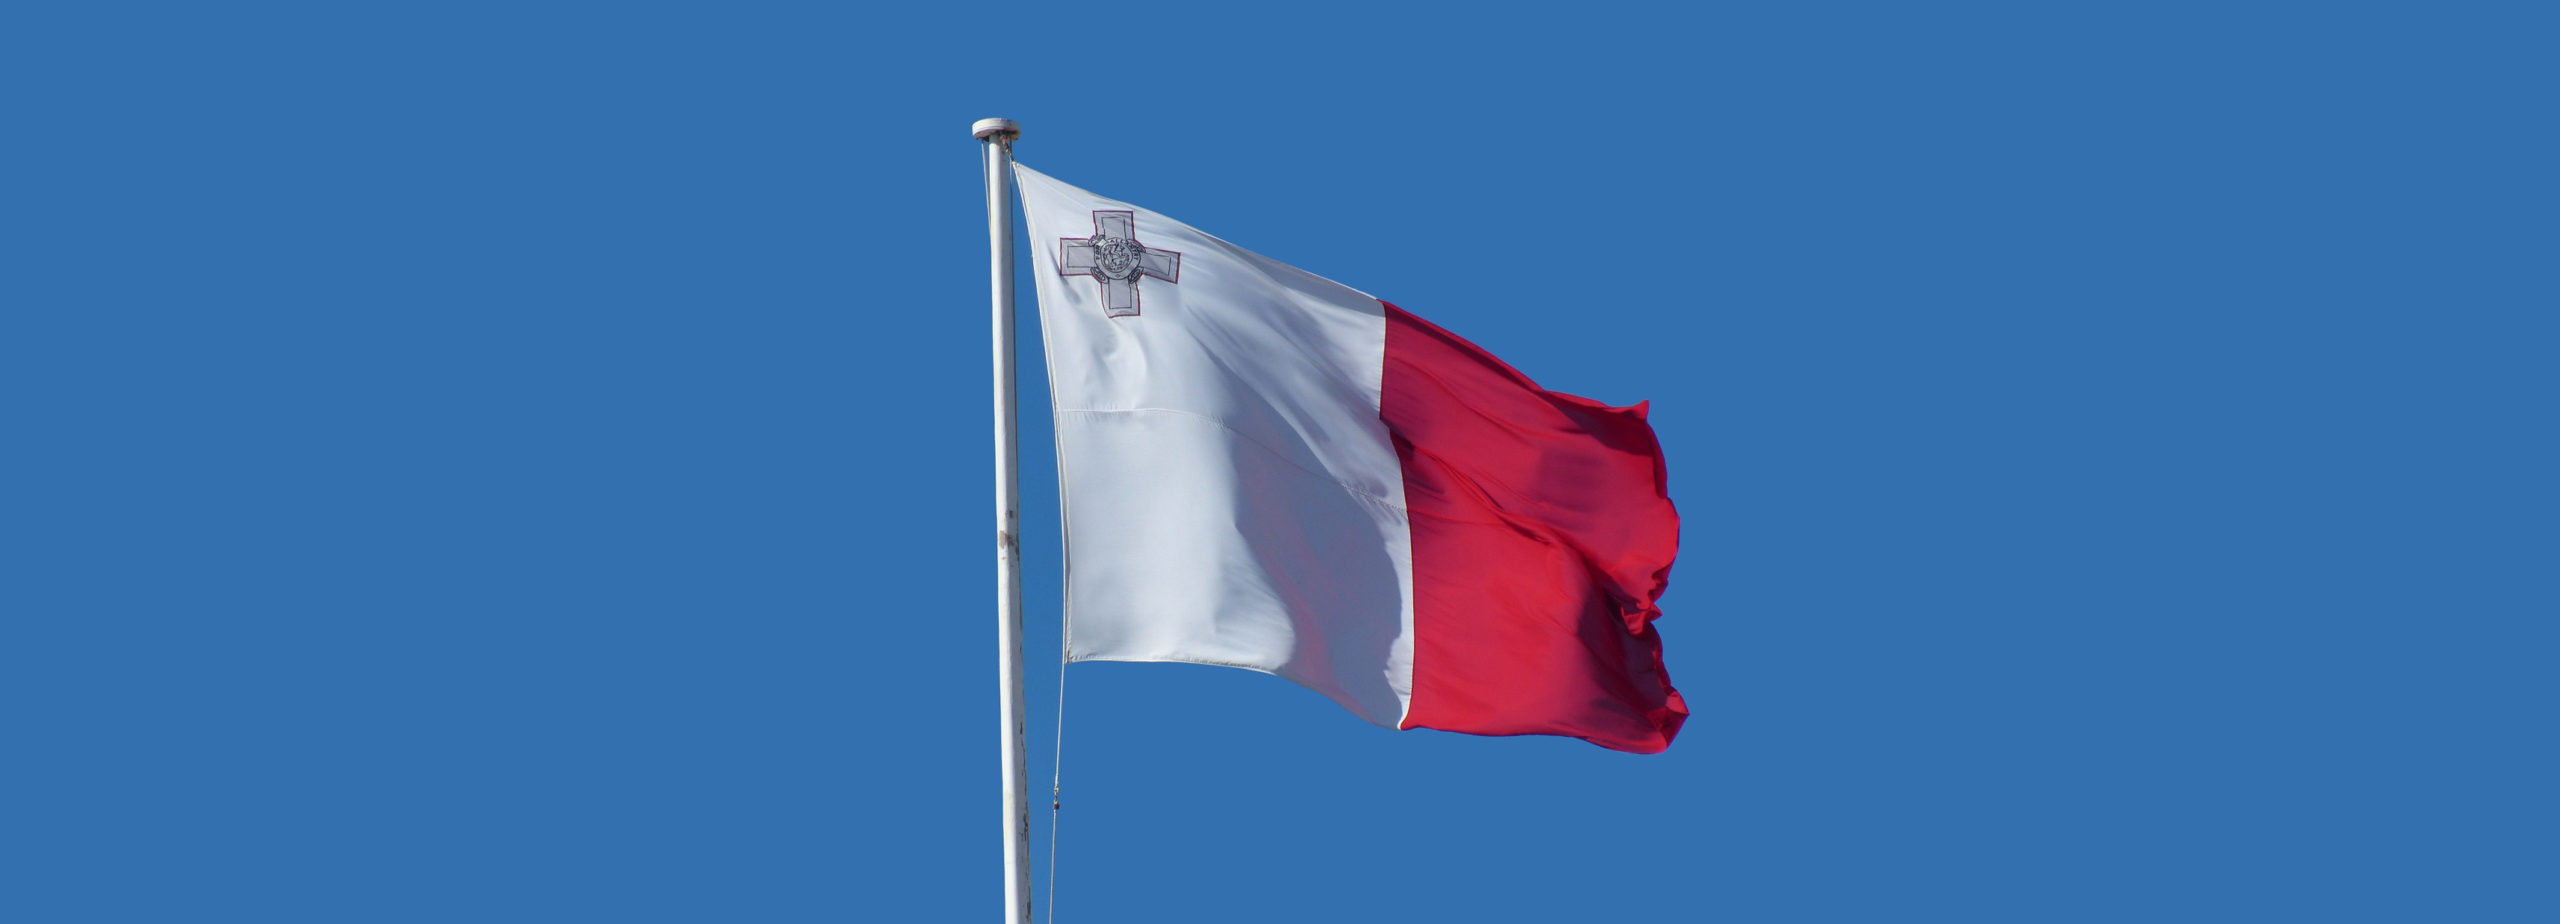 Malta will now become the first European country to legalise cannabis for recreational use, with legislation expected to come into force over the coming days. 